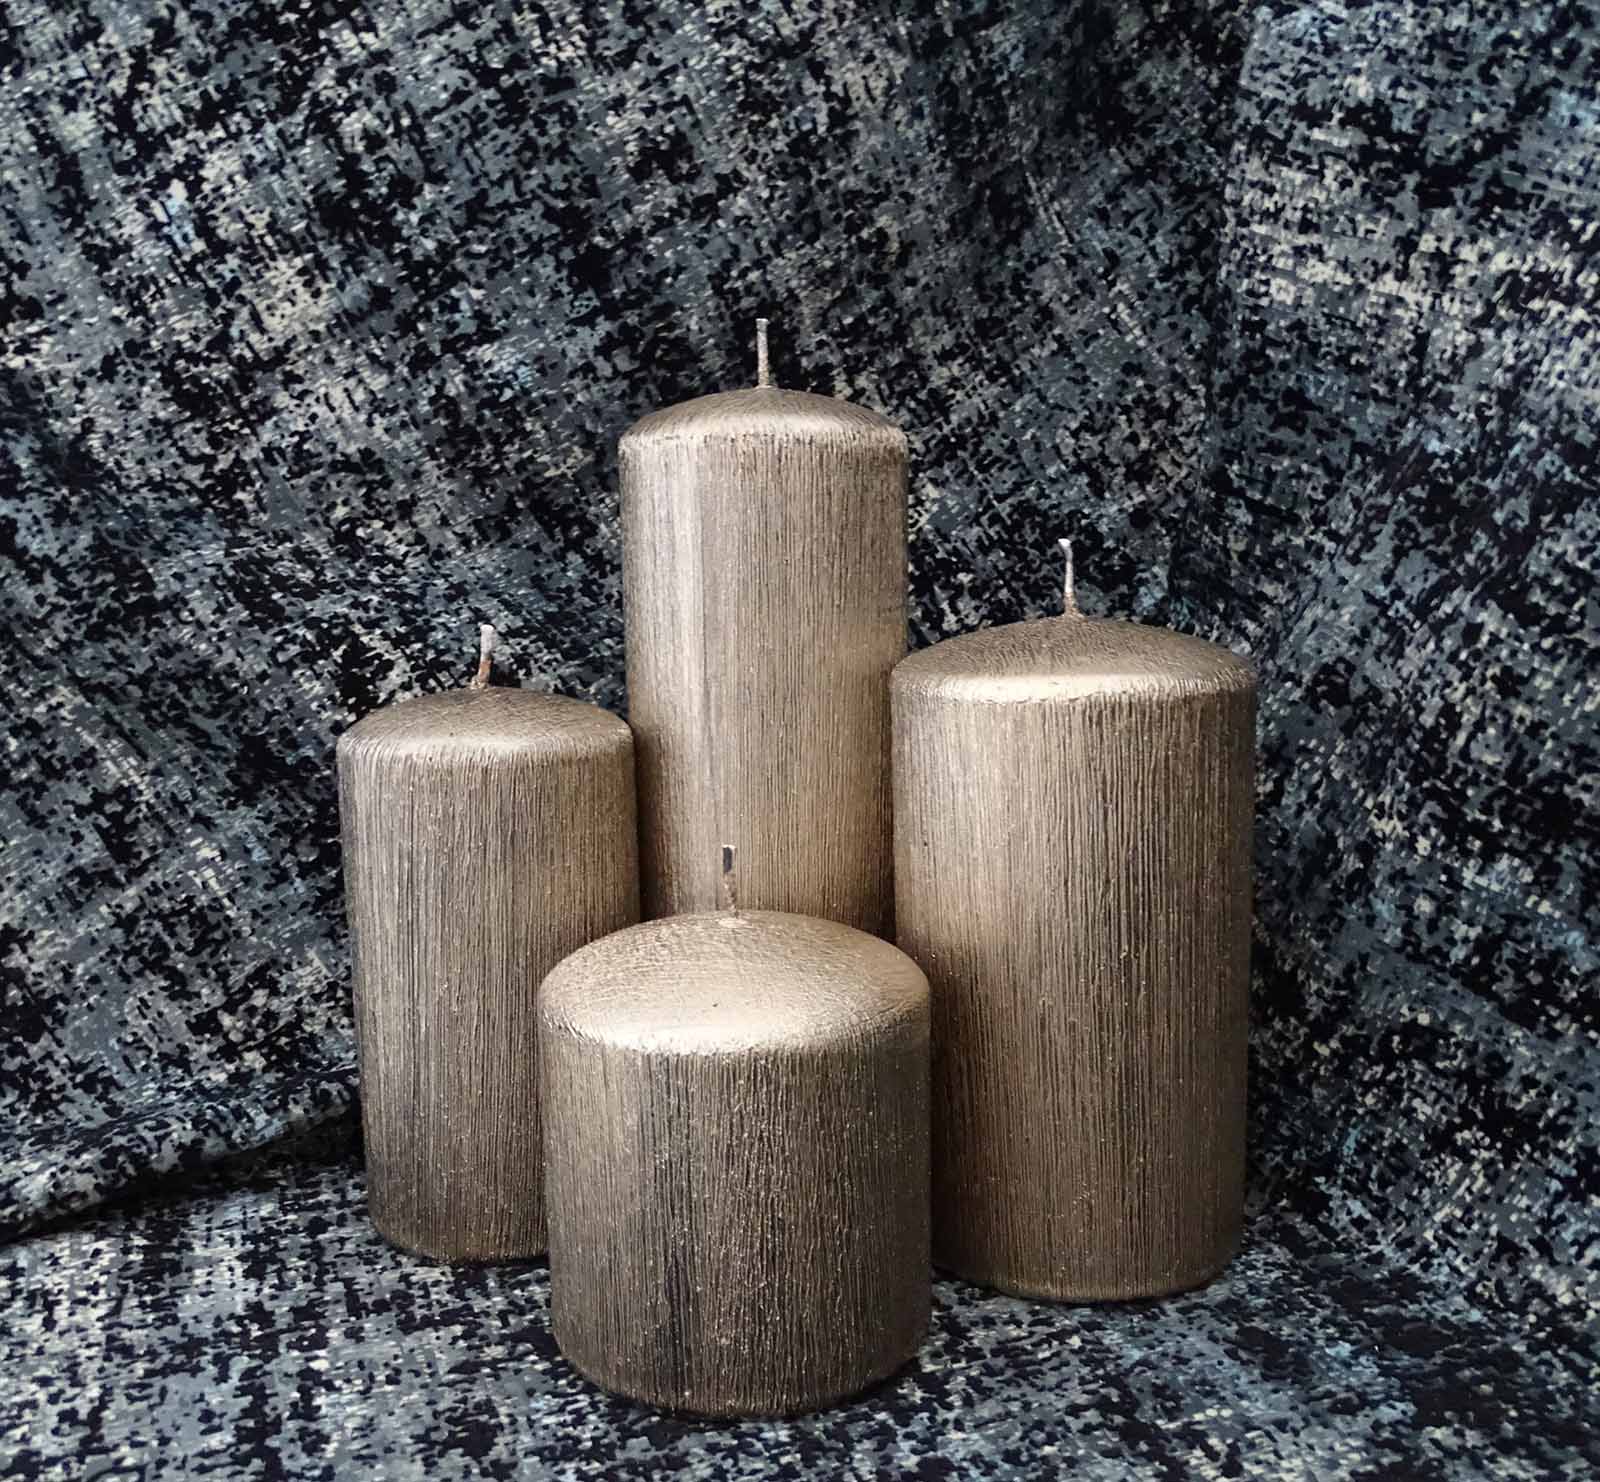 Four different size copper pillar candles in the black and white scenery